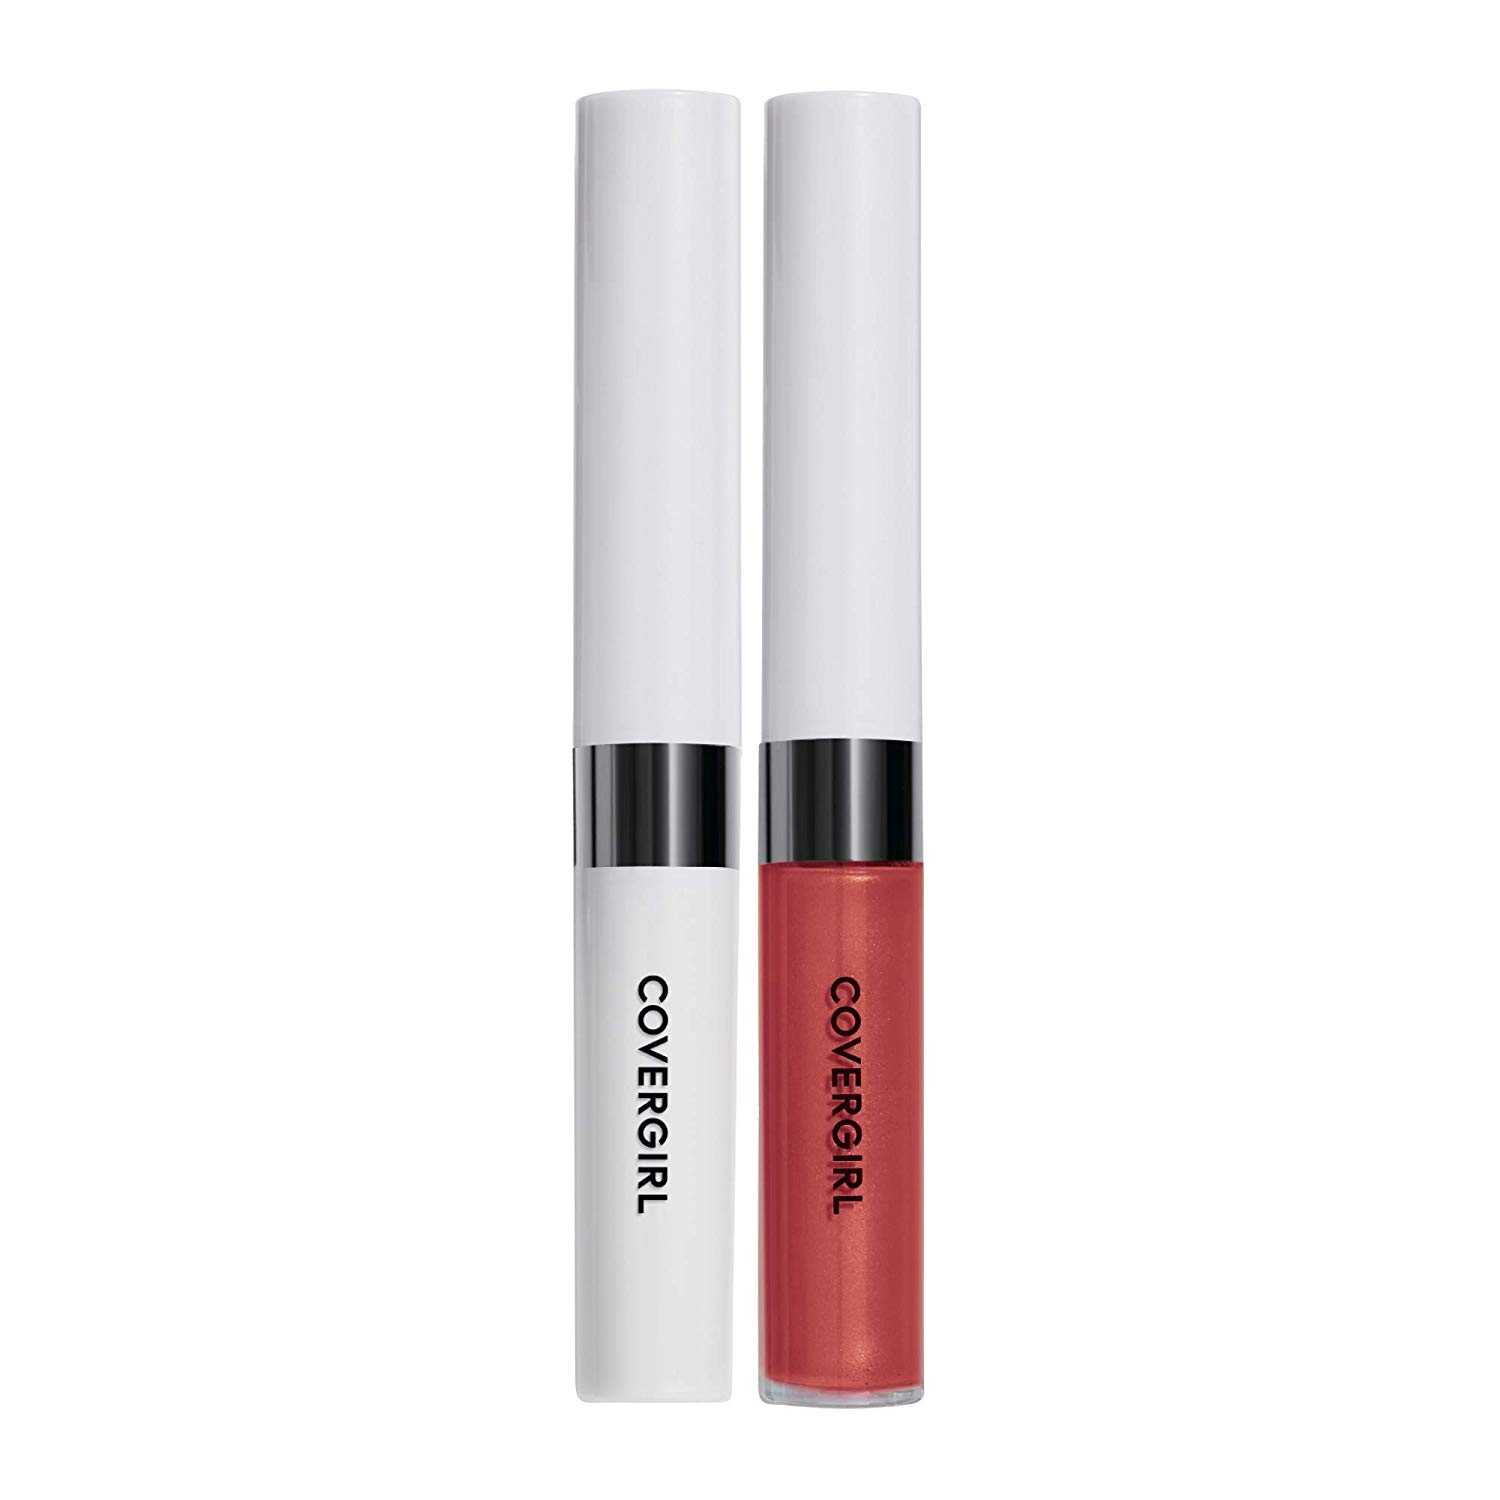 Covergirl Outlast All-Day Lip Color Custom Reds, You’re On Fire $3.81 (REG $10.49)